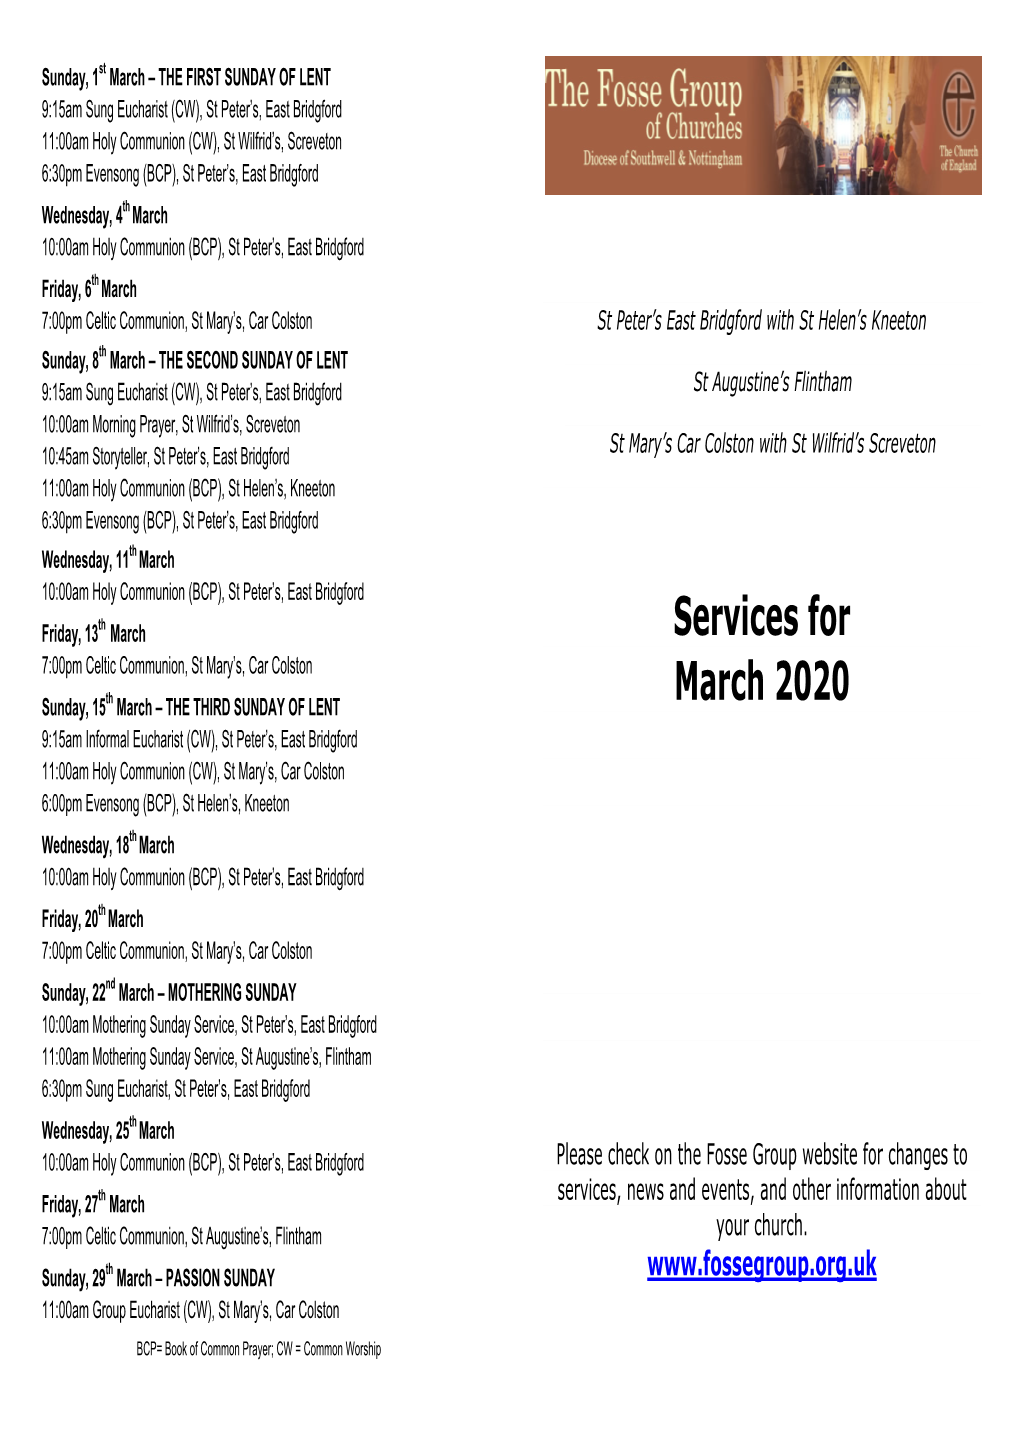 Services for March 2020